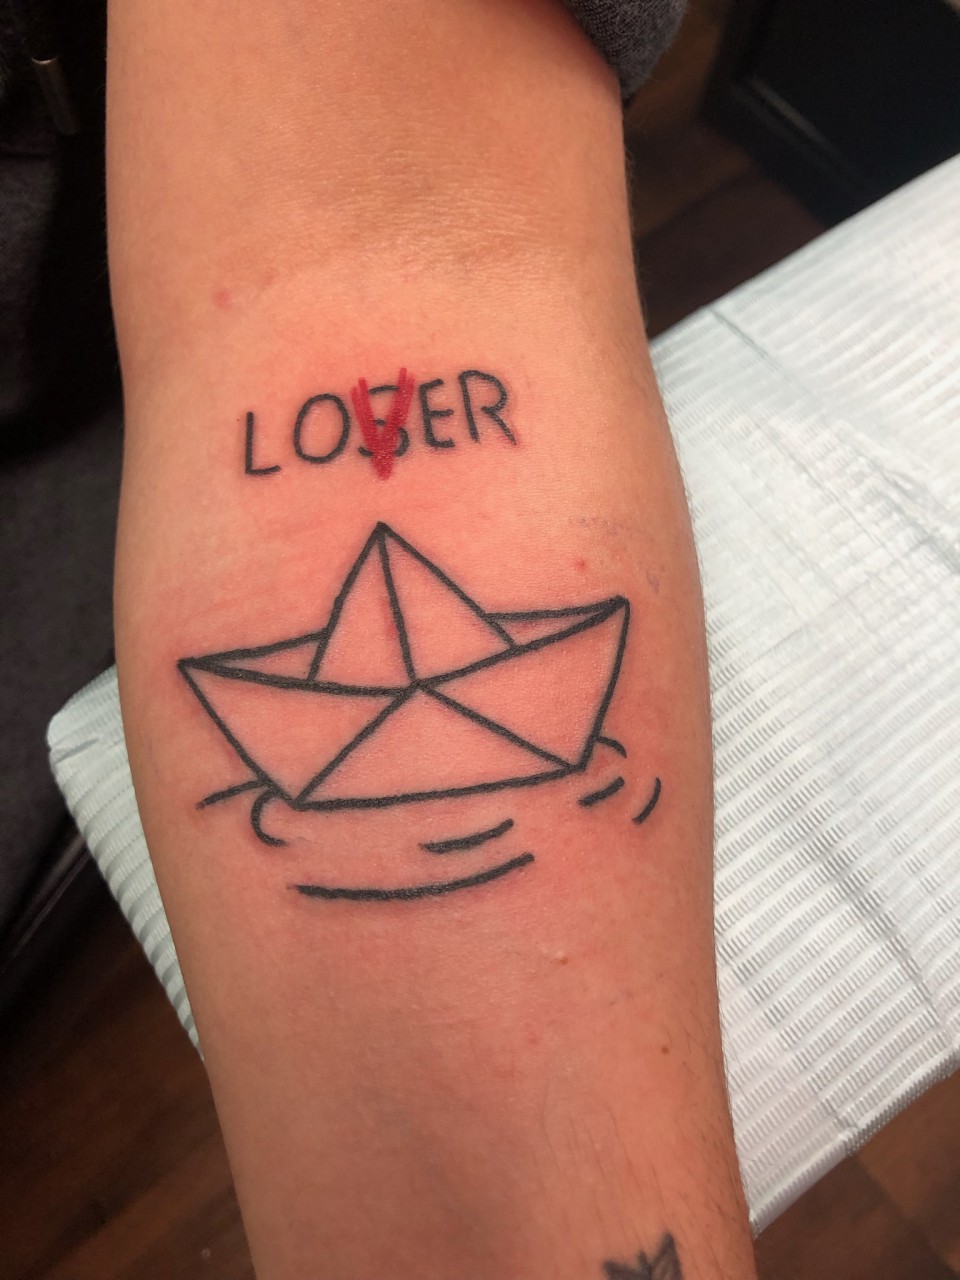 Loser Lover Tattoo Meaning  InkArtByKate